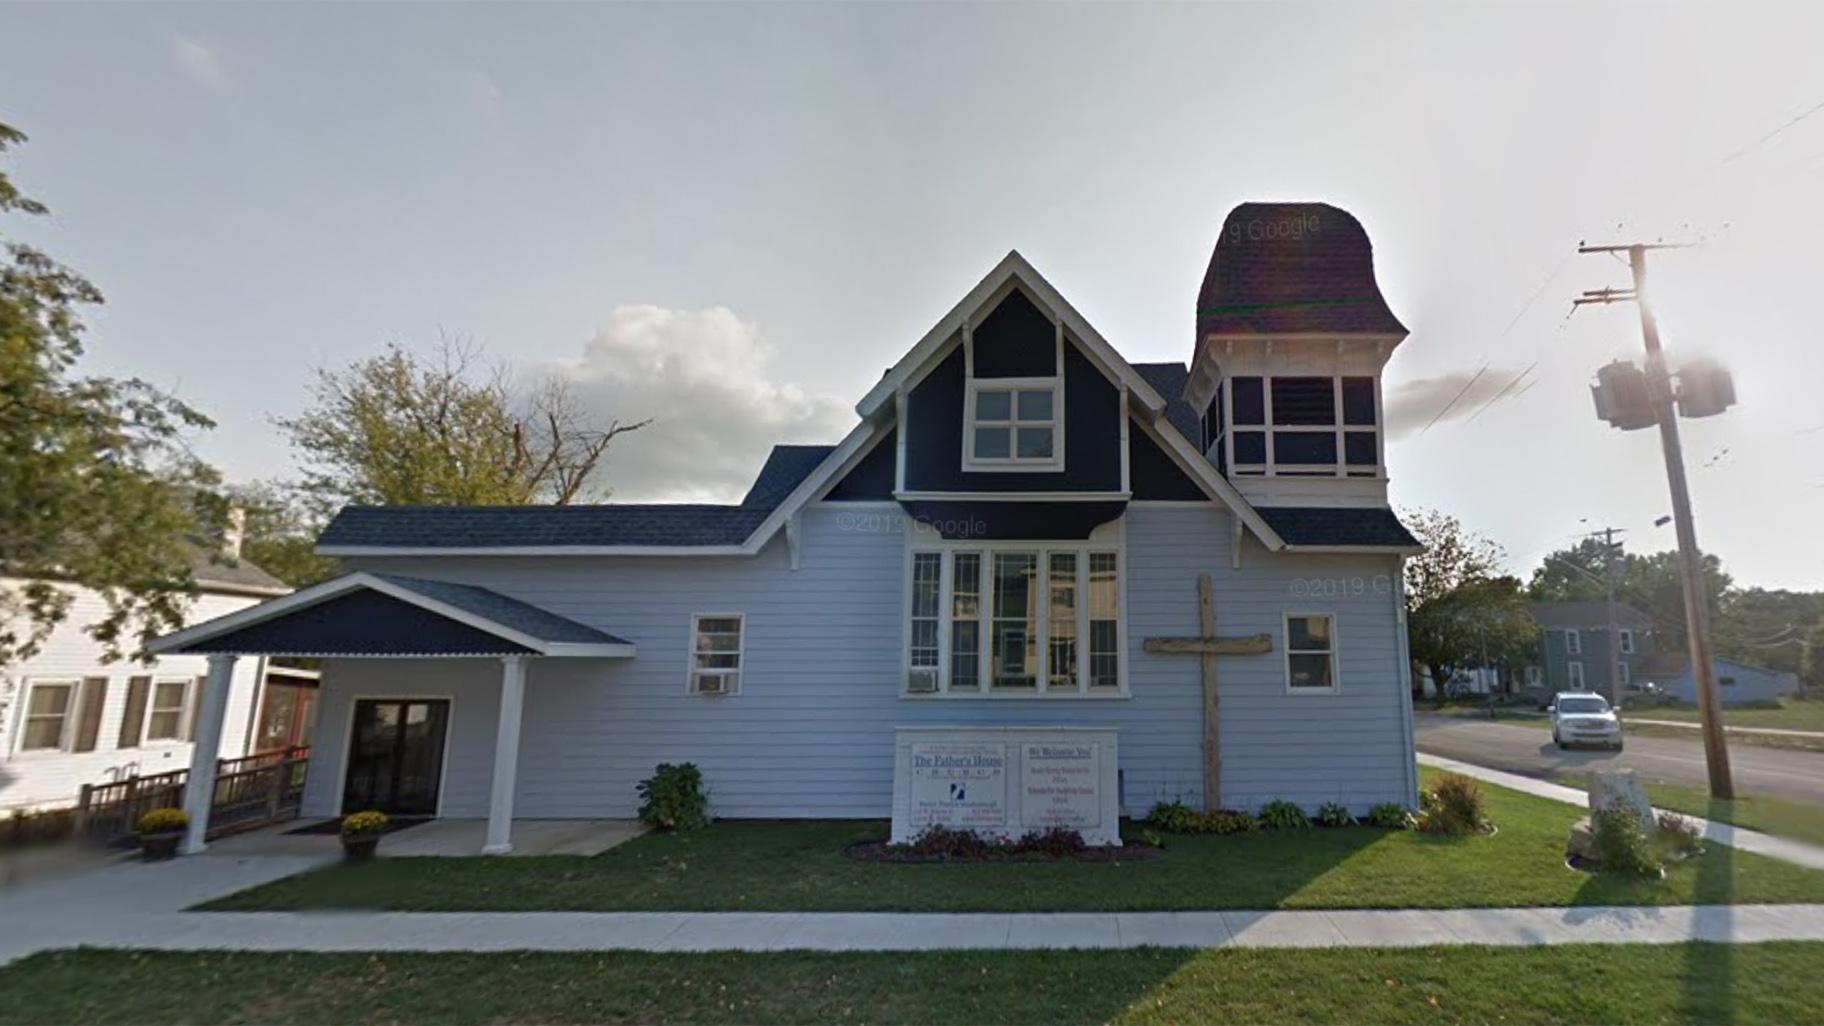 The Beloved Church at 216 W. Mason St., in Lena, Illinois. (Google Maps)